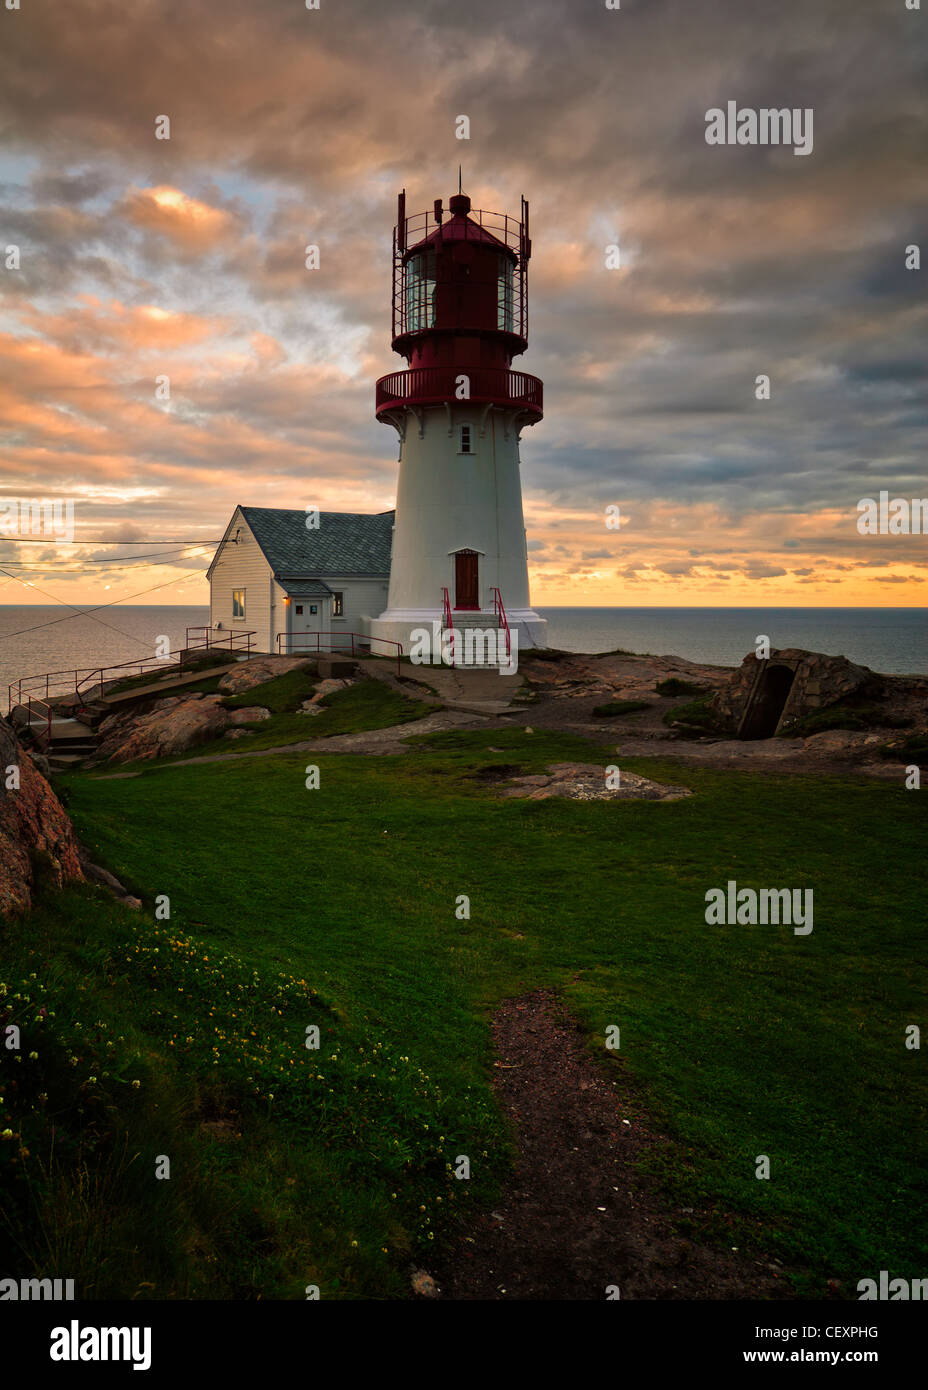 Sunset at Lindesnes lighthouse, Vest Agder, Norway. Stock Photo